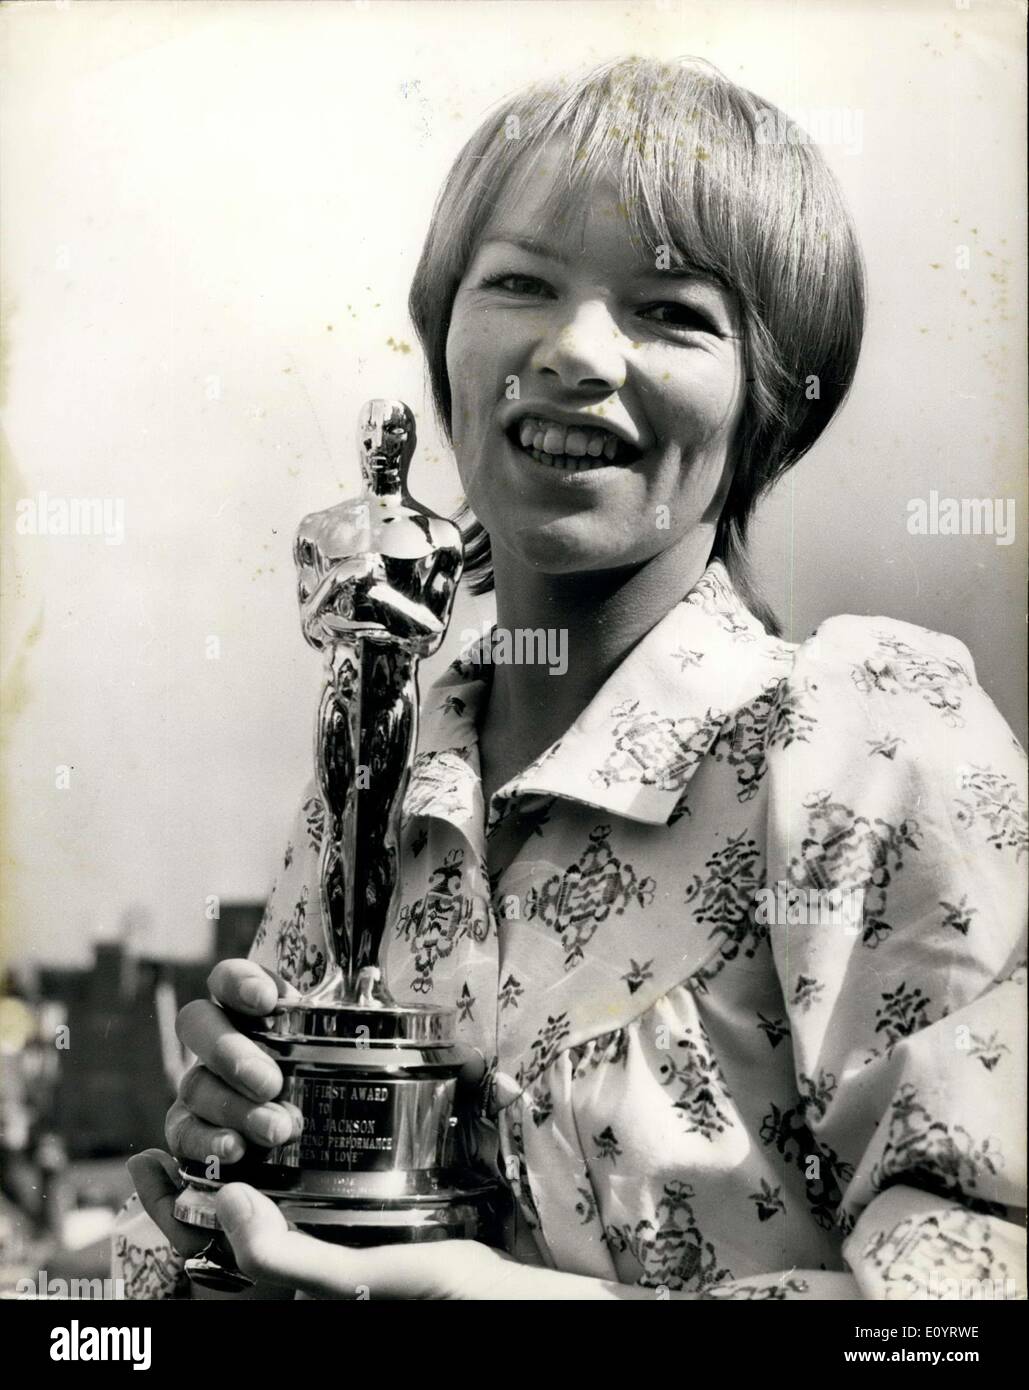 Apr. 27, 1971 - Hal B Wallis brings Oscar to Glenda Jackson: Producer Hal B. Wallis, a member of the board of governors of the Motion Picture Academy of Arts and Sciences, today presented to Glenda Jackson on behalf of the Academy the Oscar she was awarded for her performance in ''women in love''. Wallis, who arrived in London over the week end to begin production on his film ''Mary, Queen of Scots'', in which Miss Jackson co stars with Vanessa Redgrave, brought the Oscar with his from Hollywood Stock Photo